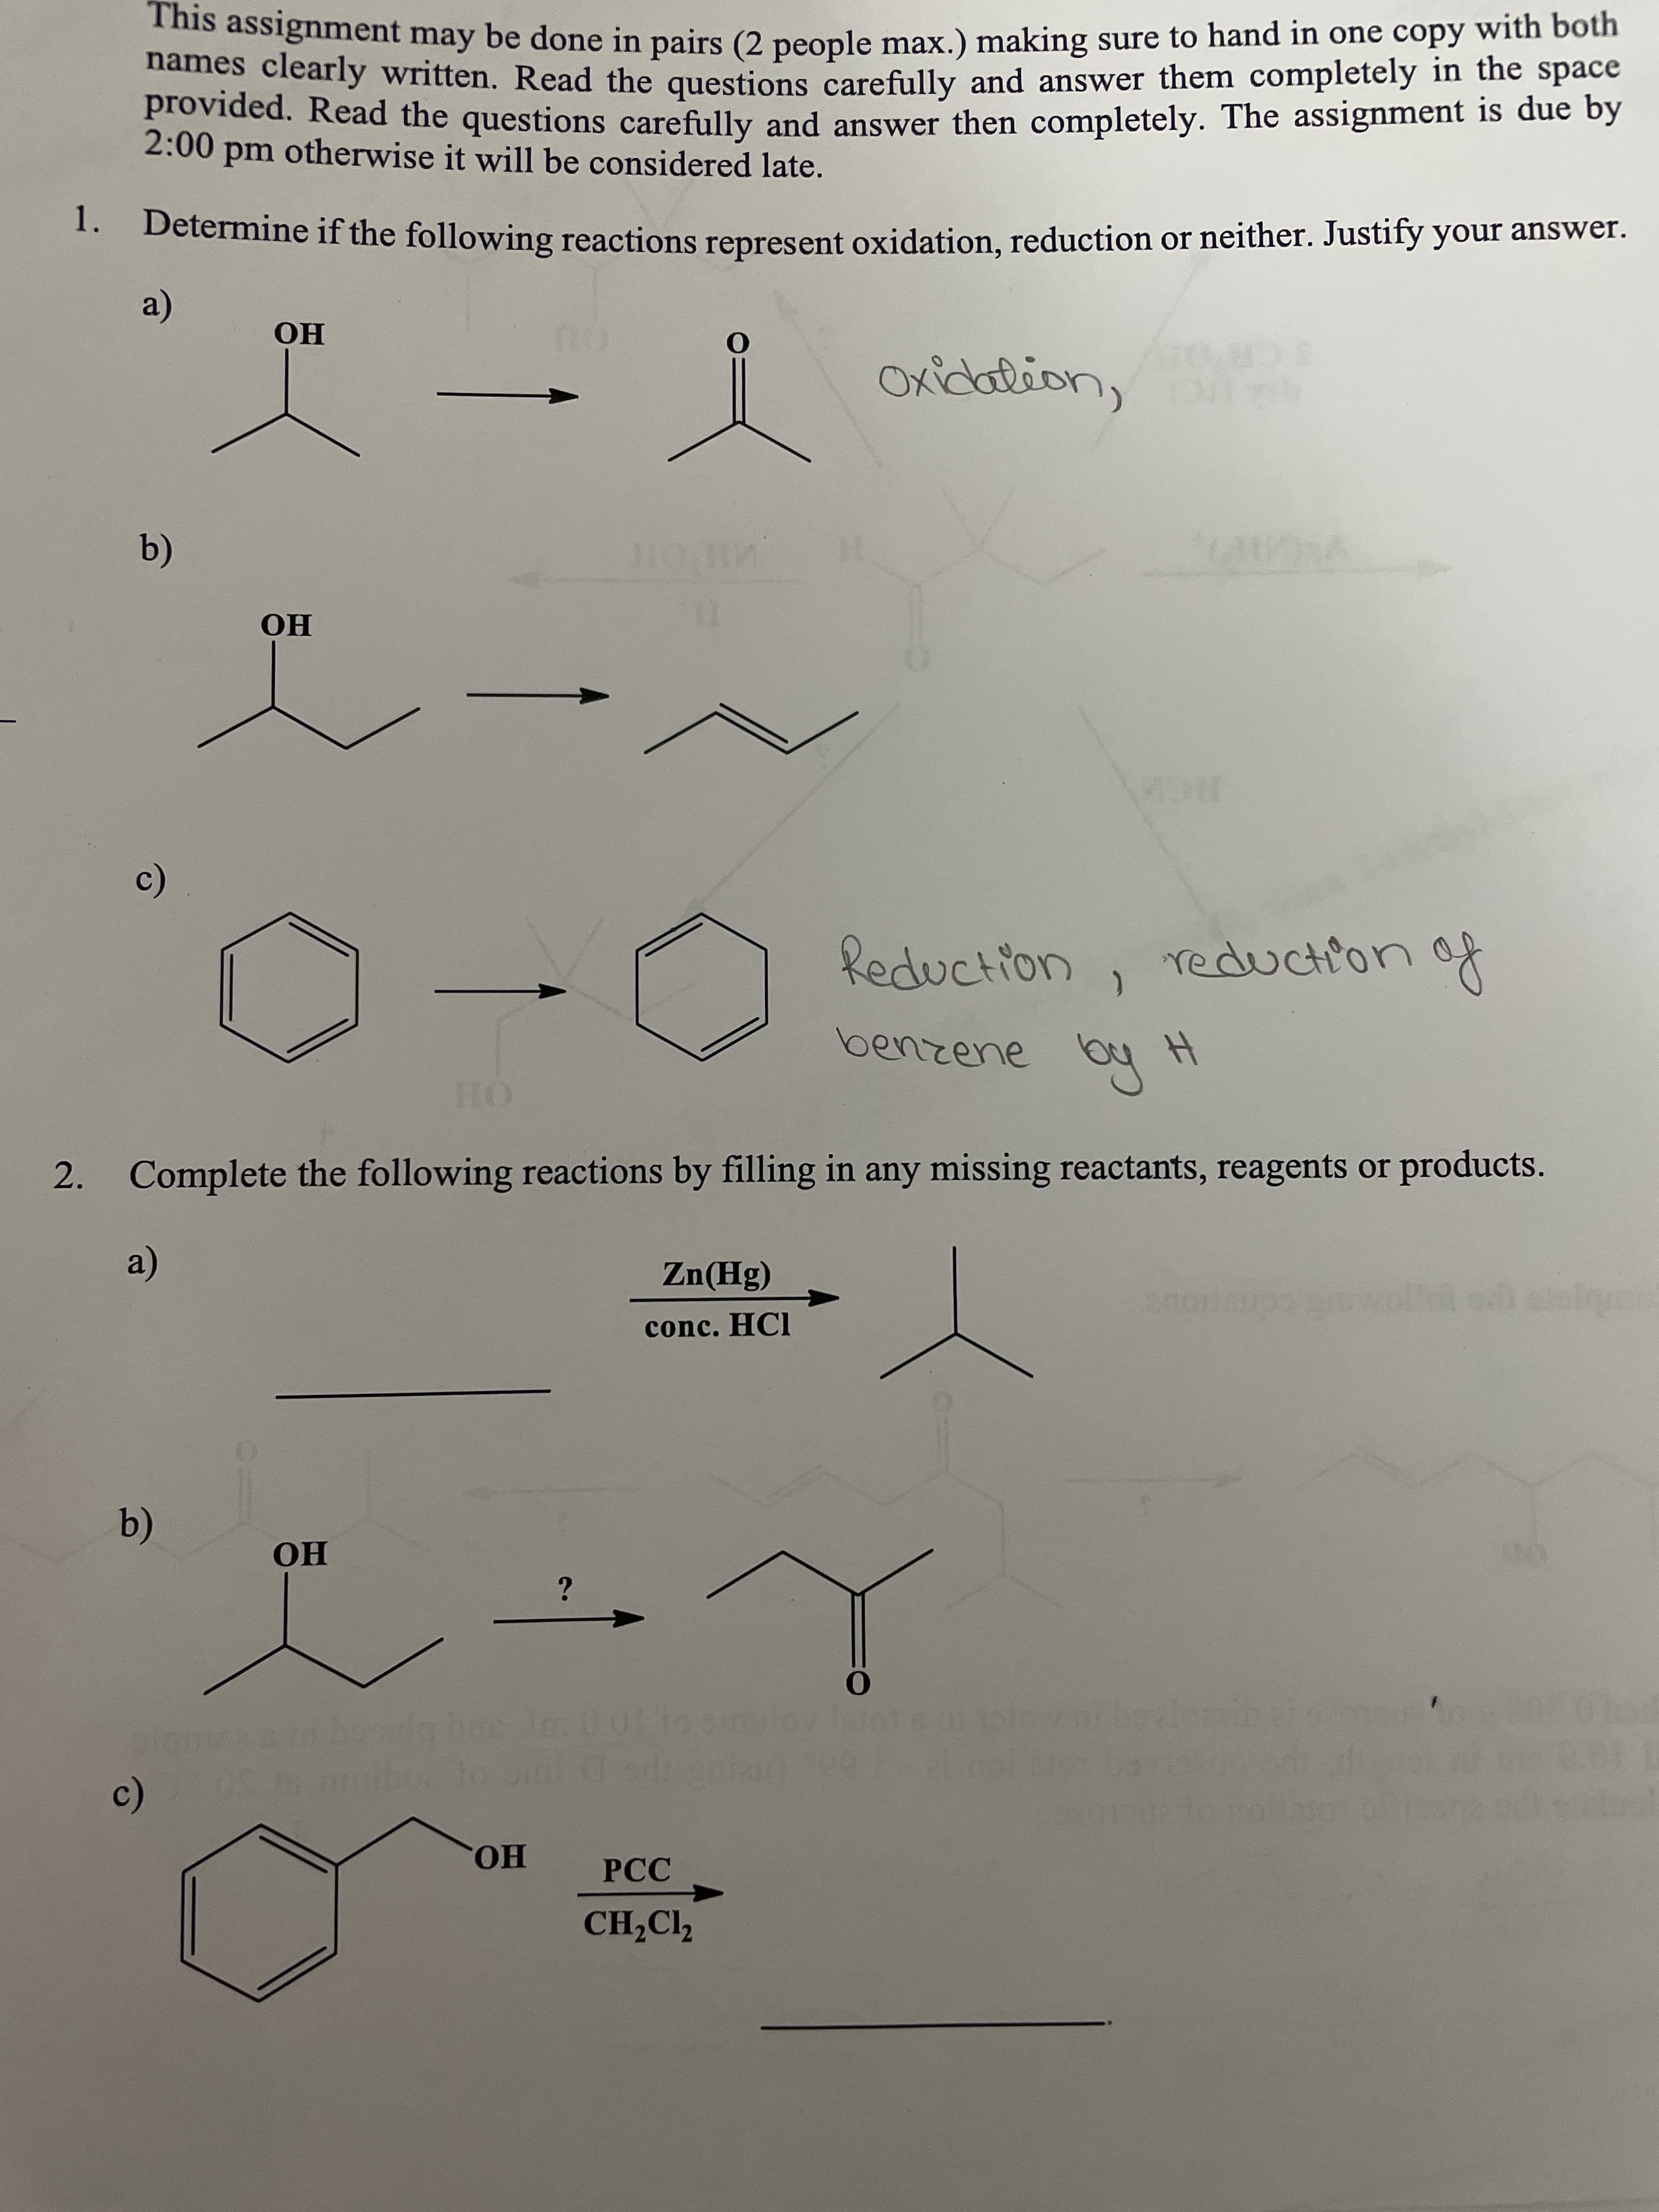 is assignment may be done in pairs (2 people max.) making sure to hand in one copy with both
names clearly written. Read the questions carefully and answer them completely in the space
provided. Read the questions carefully and answer then completely. The assignment is due by
2:00 pm otherwise it will be considered late.
1. Determine if the following reactions represent oxidation, reduction or neither. Justify your answer.
a)
Но
I Okcotion,
НО
Reduction
reduction
2. Complete the following reactions by filling in any missing reactants, reagents or products.
a)
conc. HCI
(b)
Но
on
HO
РСС
CH,Cl2
